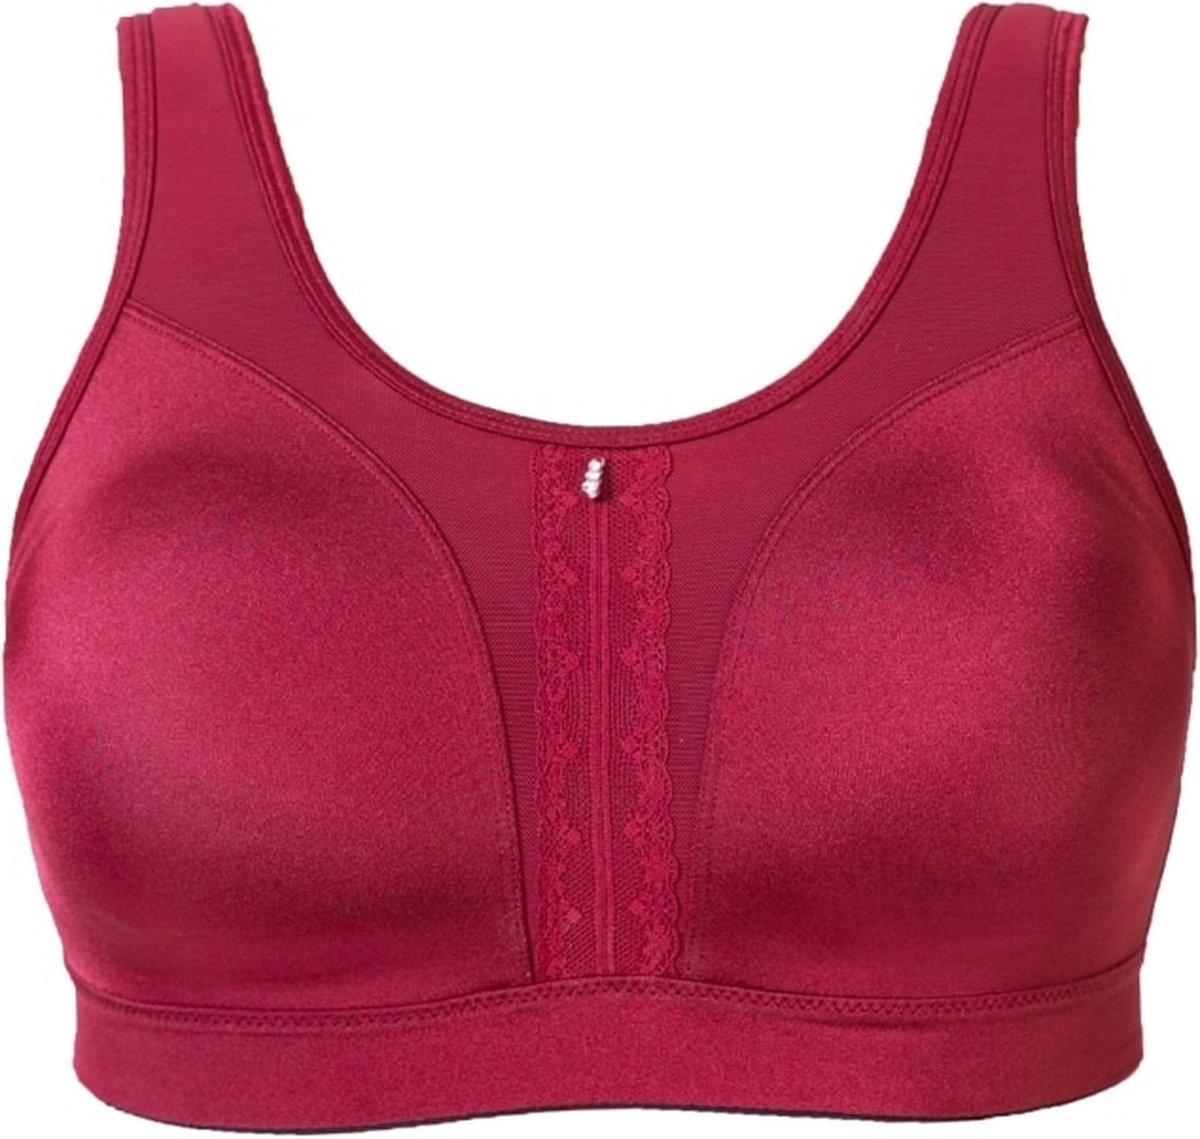 High impact Sport BH (zonder beugel) Cannes, Deep Red / Bordeaux rood, maat: 100H